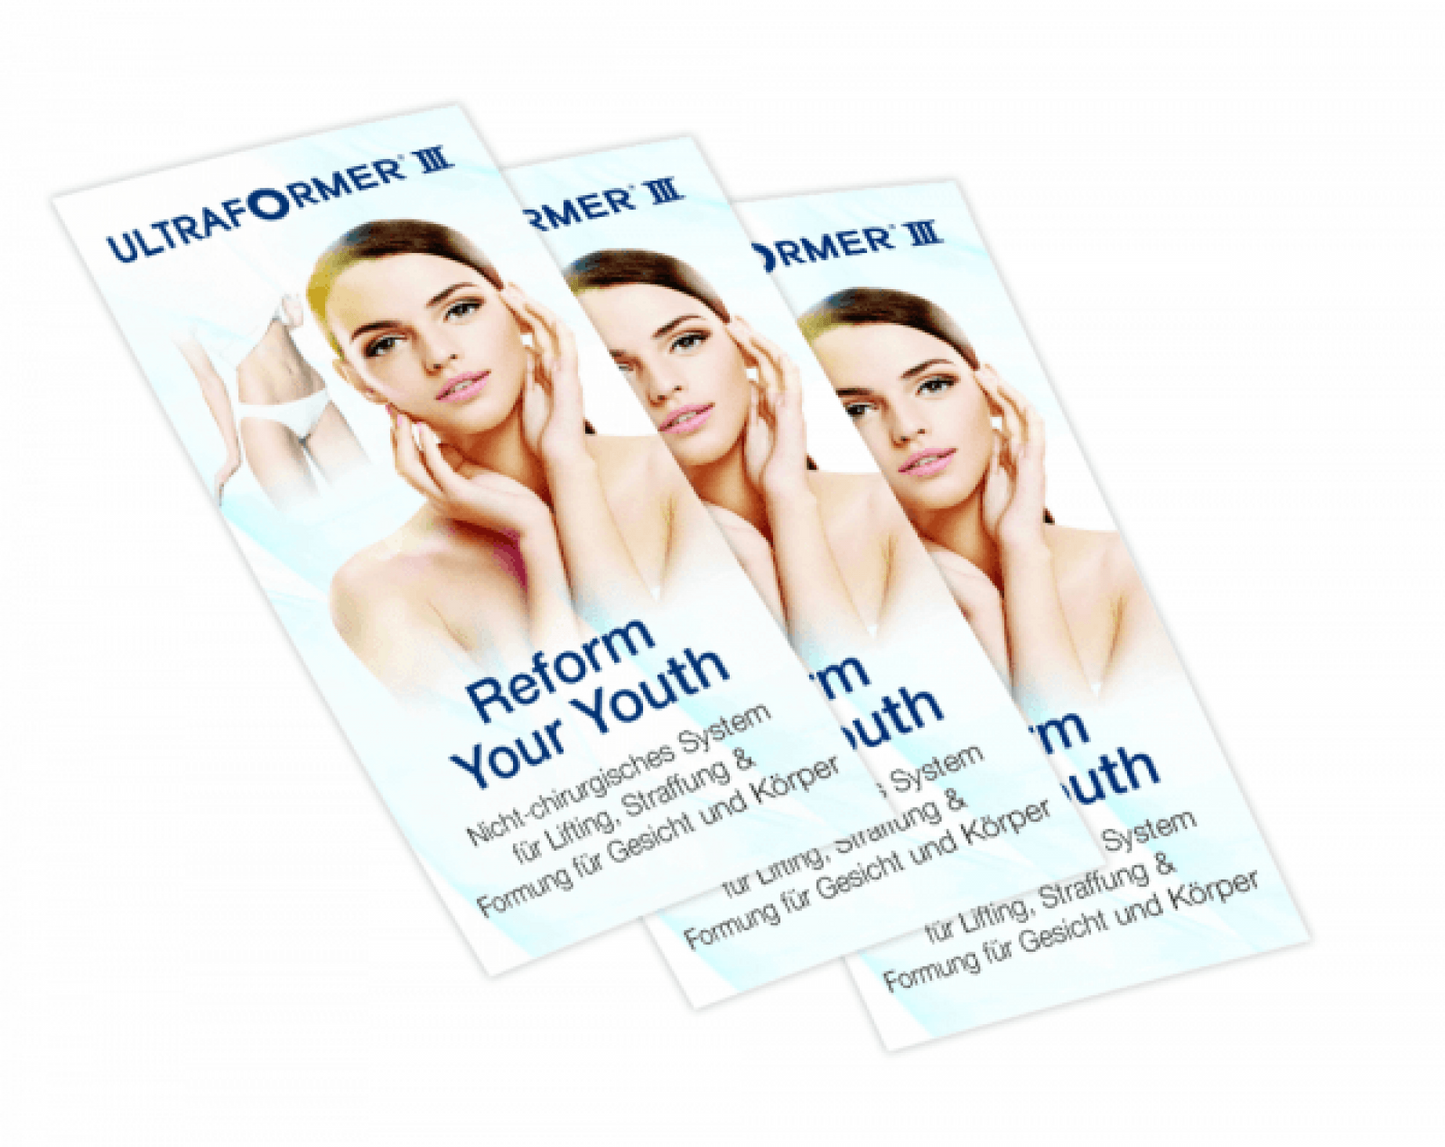 Brochure pour patients Ultraformer III "Reform your Youth"